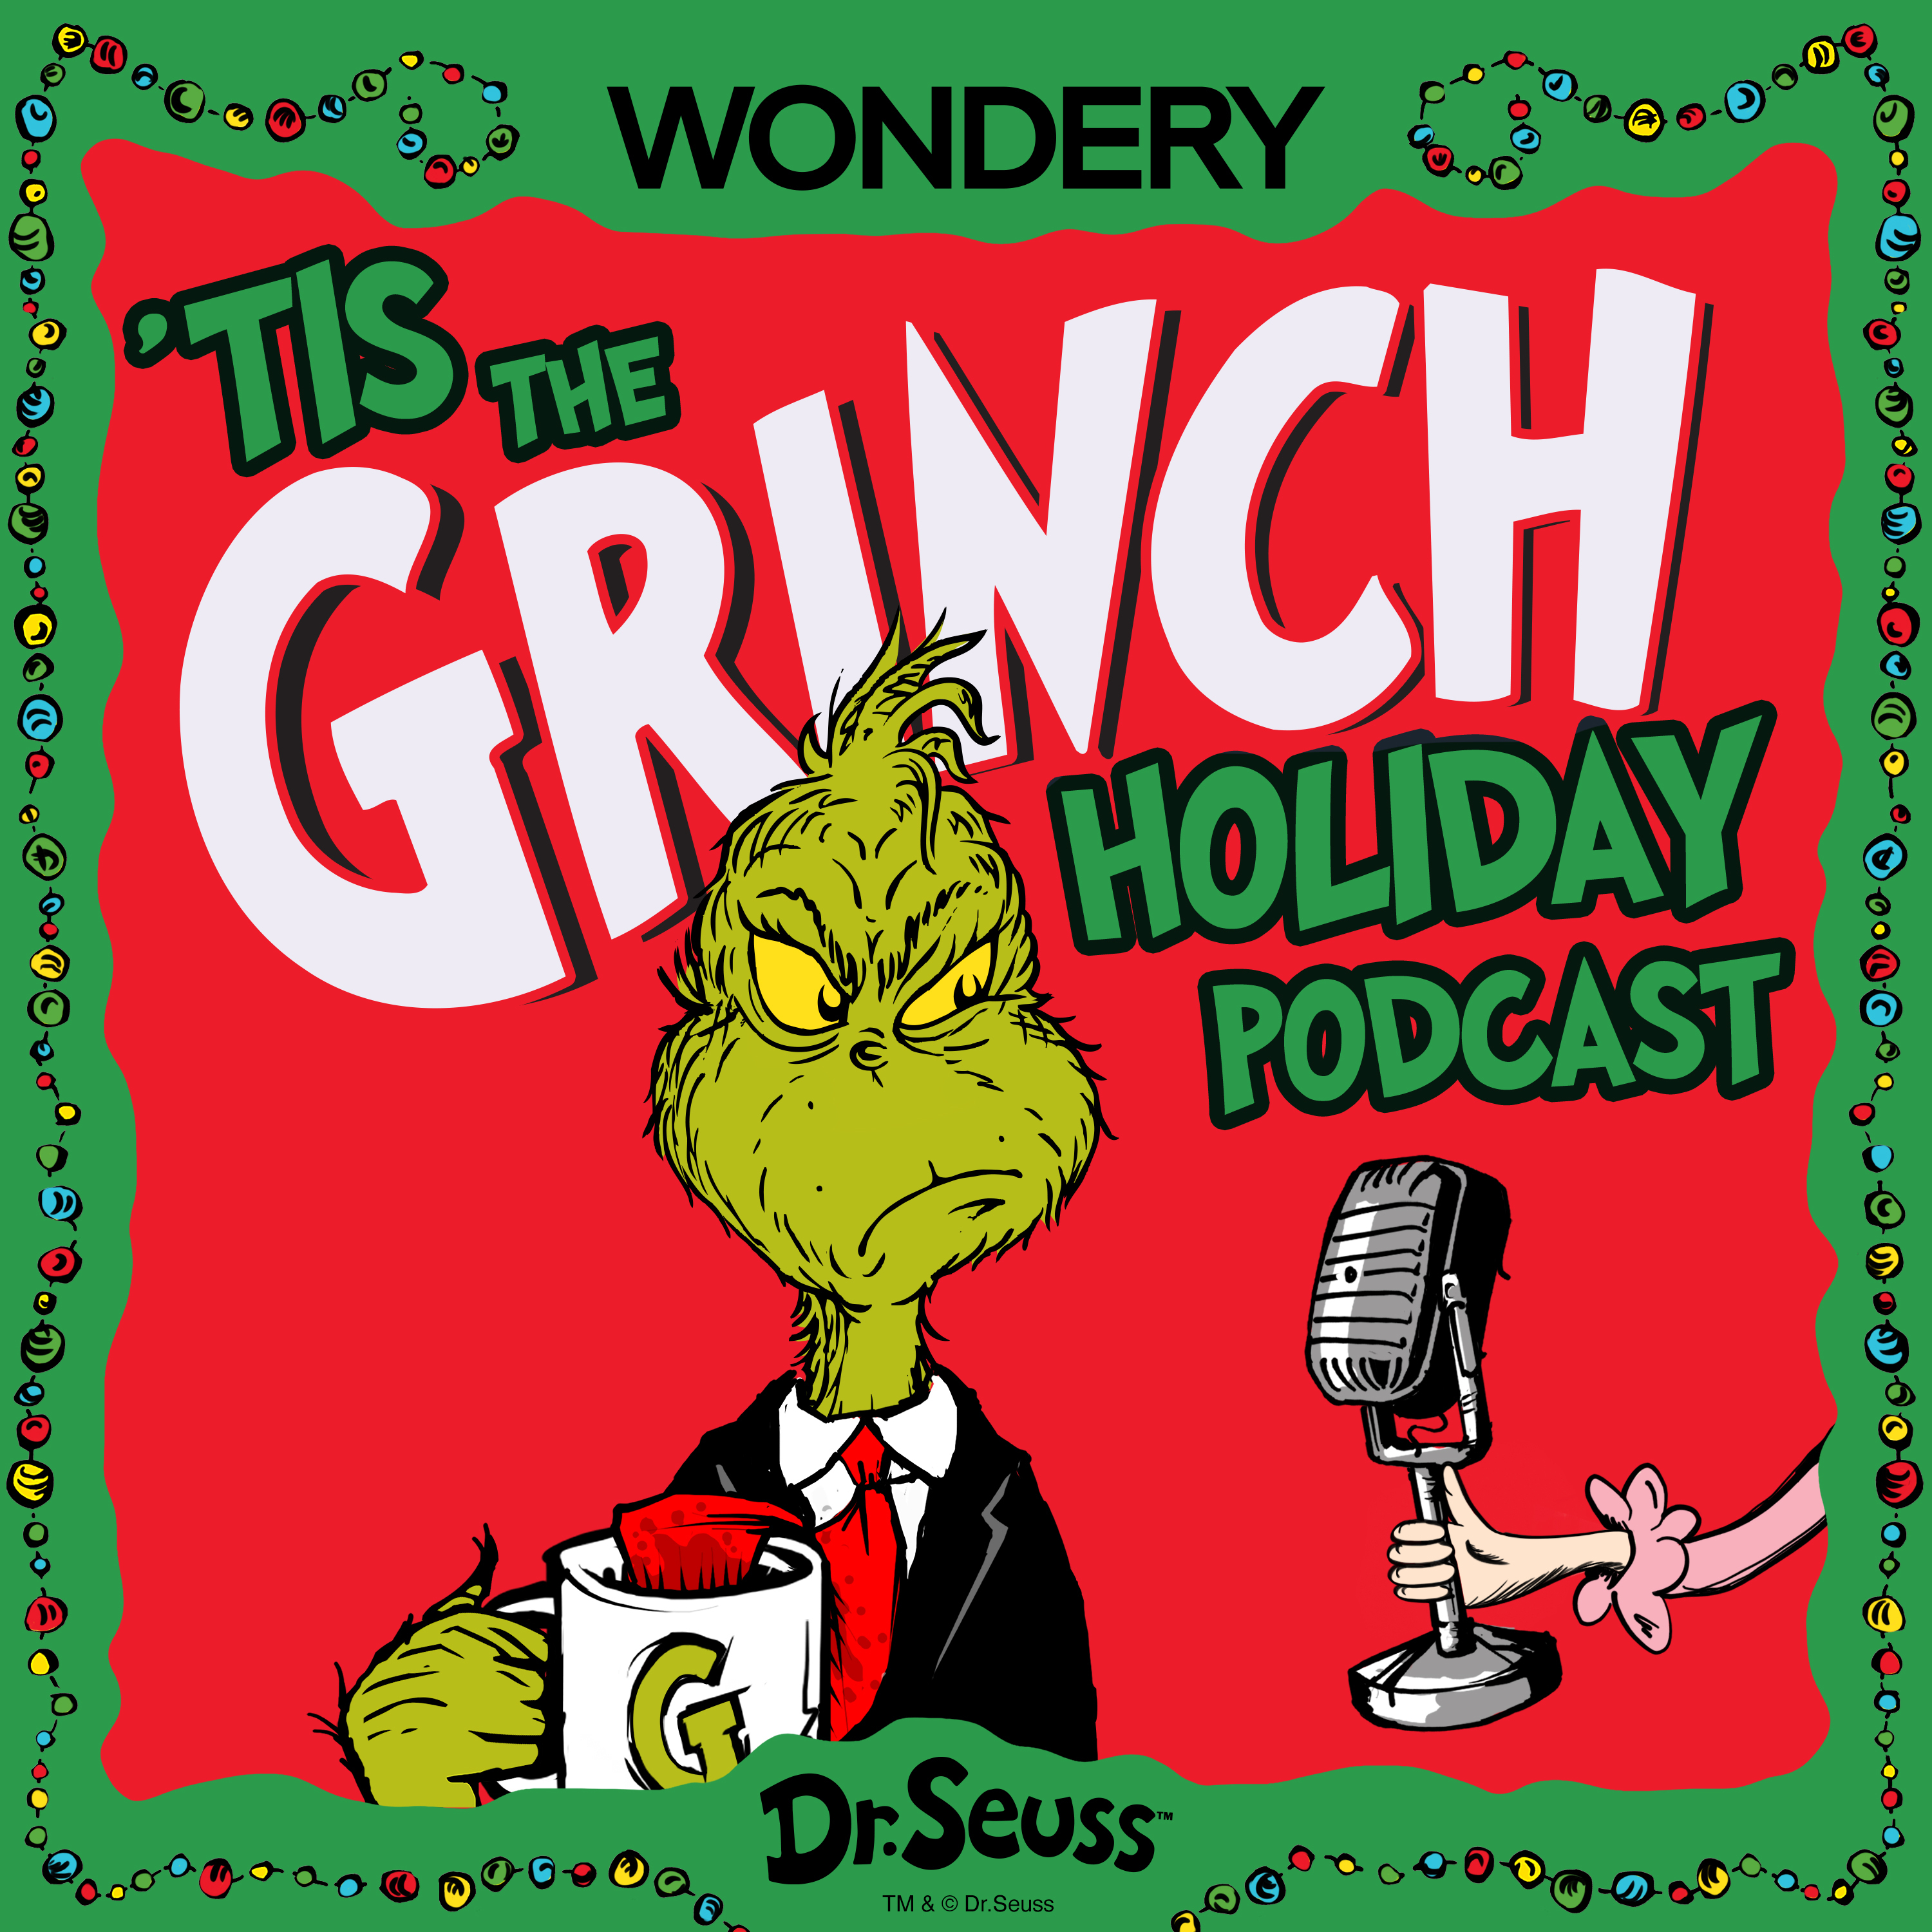 Listen Now: ‘Tis The Grinch Holiday Podcast